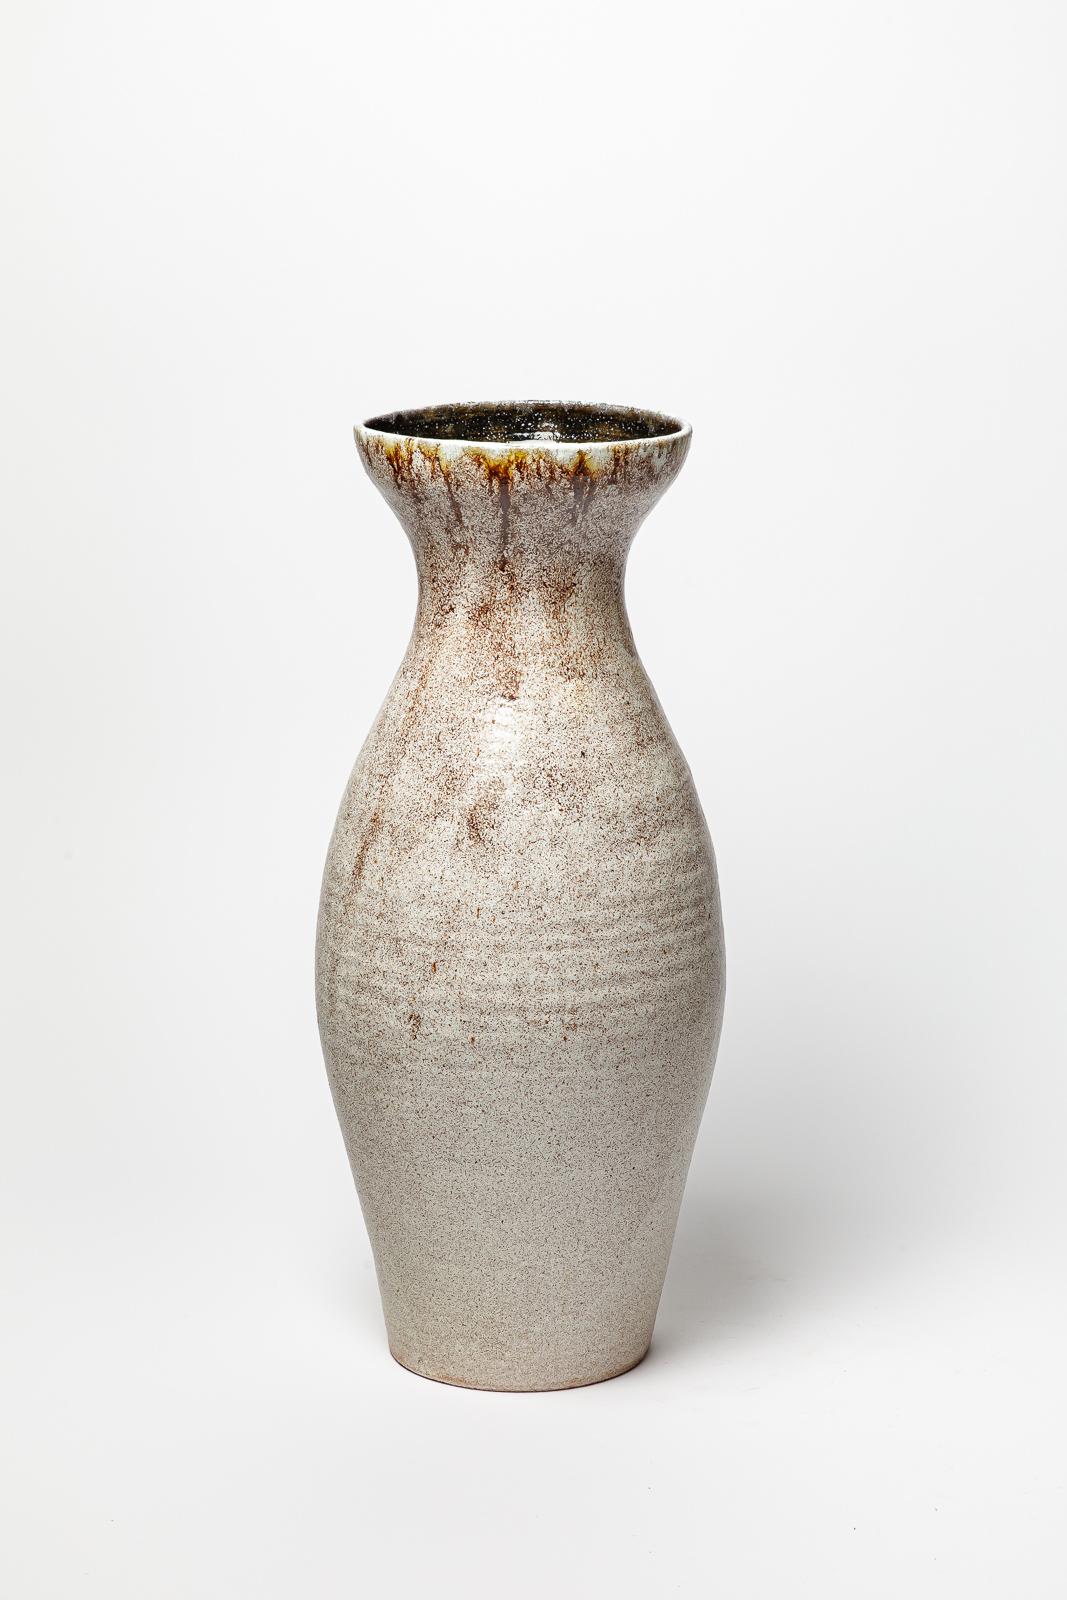 Beaux Arts White glazed stoneware vase by Accolay, circa 1960-1970. For Sale